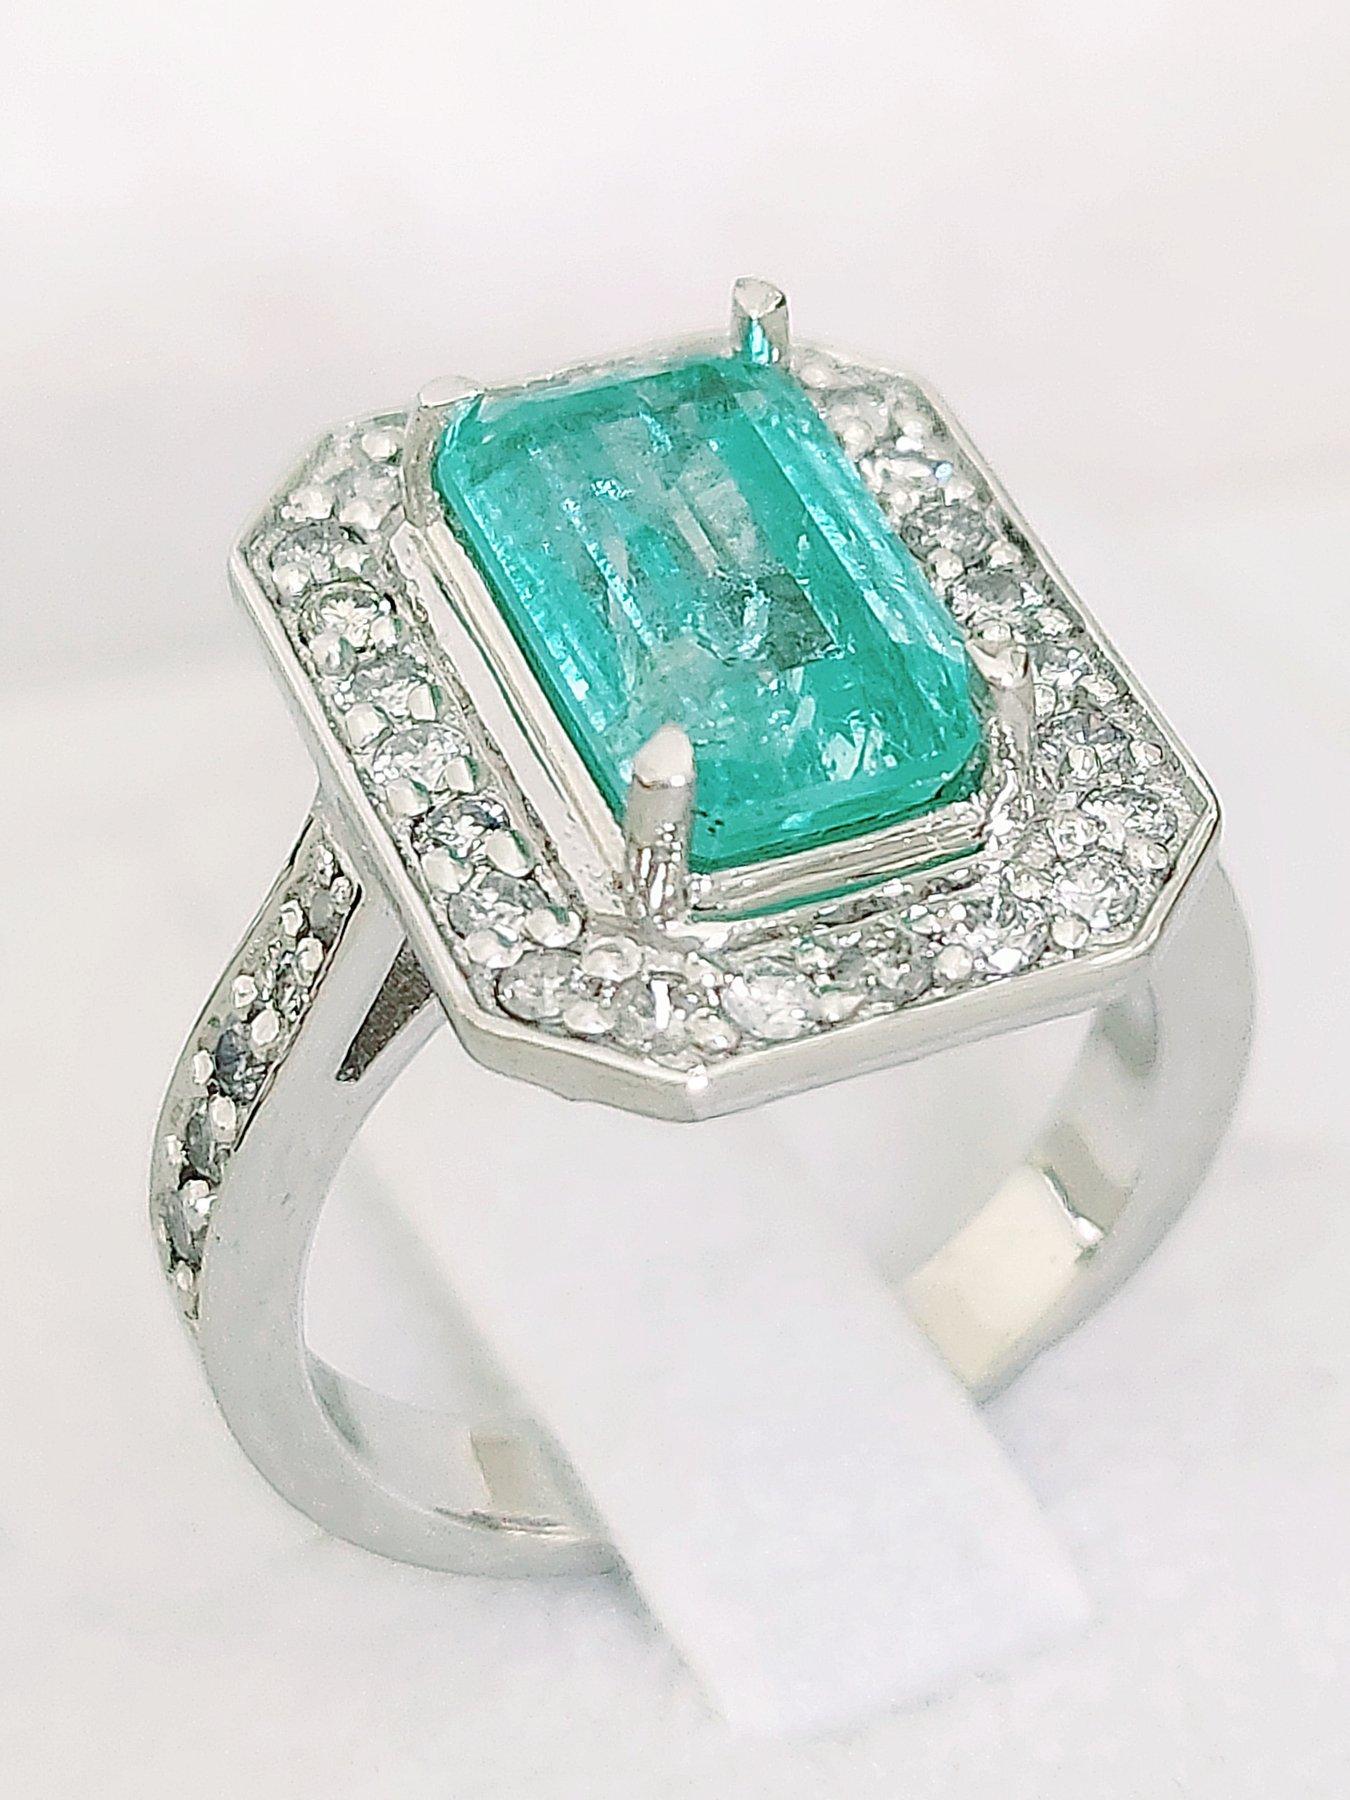 A beautiful Emerald ring made of 14K white gold.
In the center of the ring is a emerald-shaped Emerald gem weighing 2.89 carats, Green color.
Around the Emerald and on the sides of the ring are set 34 natural Diamonds with a total weight of 1.14